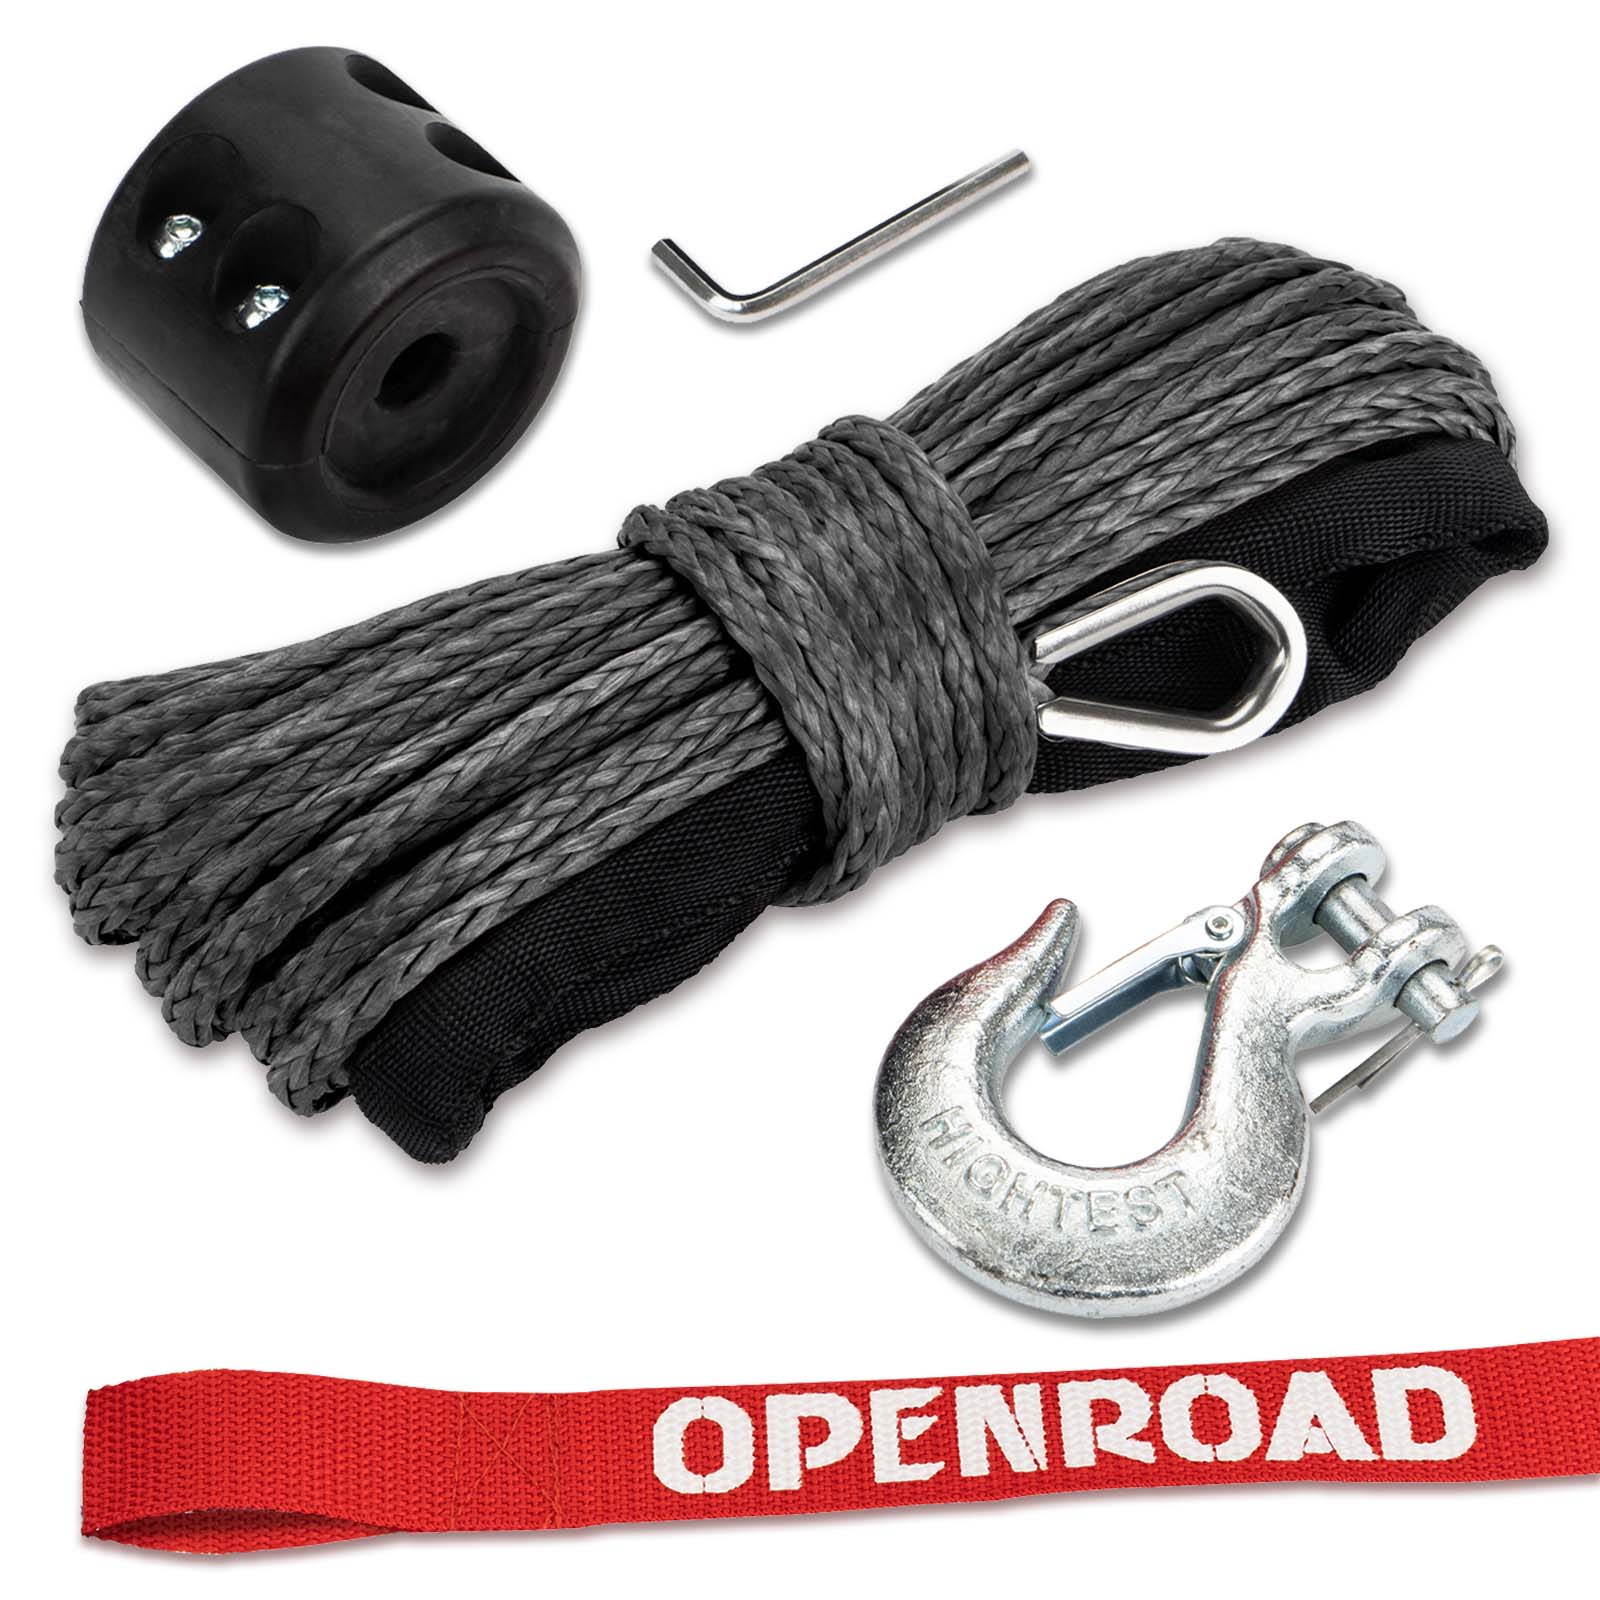 OPENROAD Synthetic Winch Rope 1/4 x 50'Winch Rope Extension with Blac –